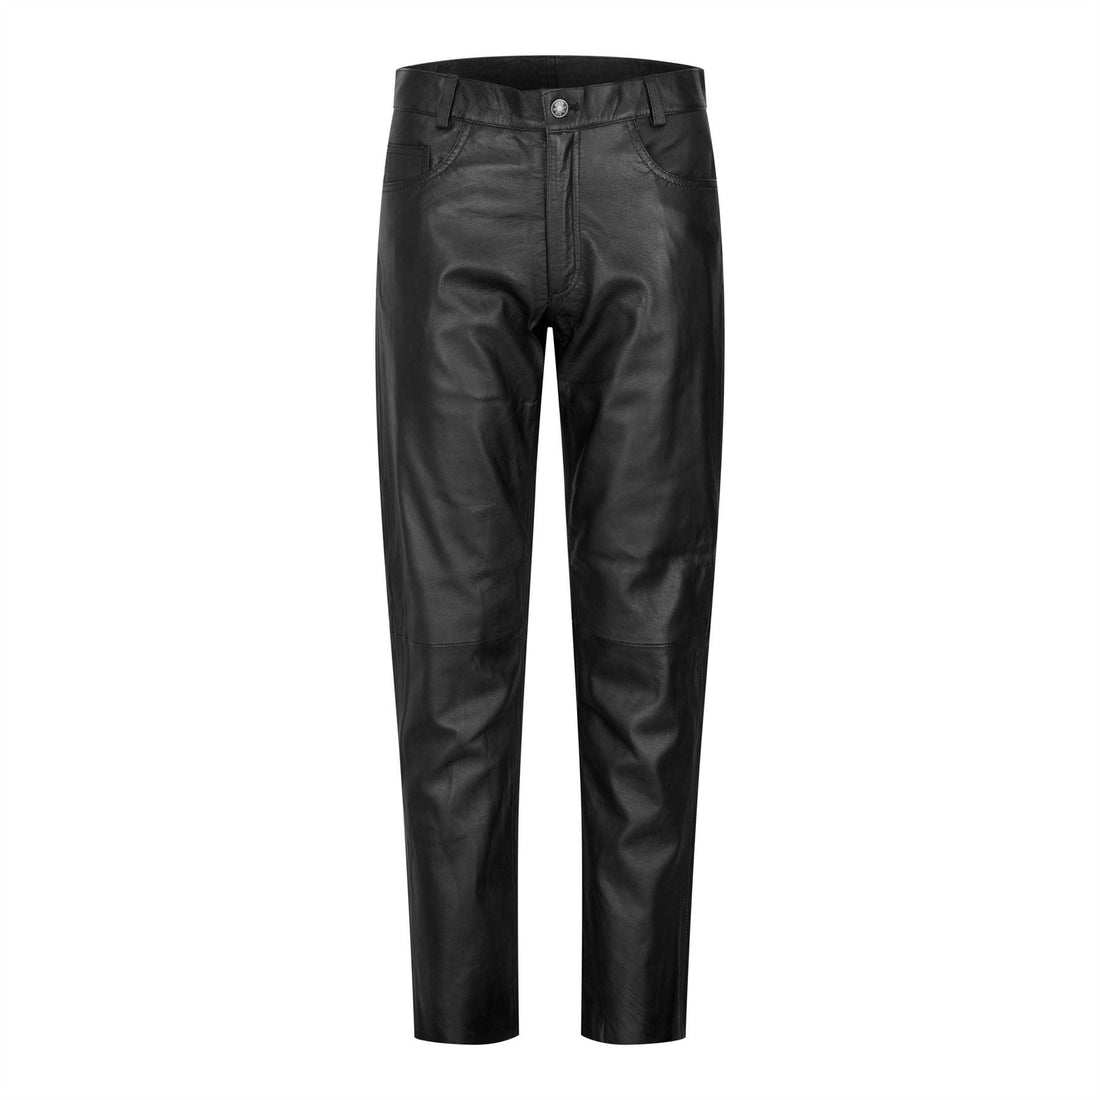 Womens Real Leather Jeans Trousers Casual Retro 1980s Vintage Black - Knighthood Store